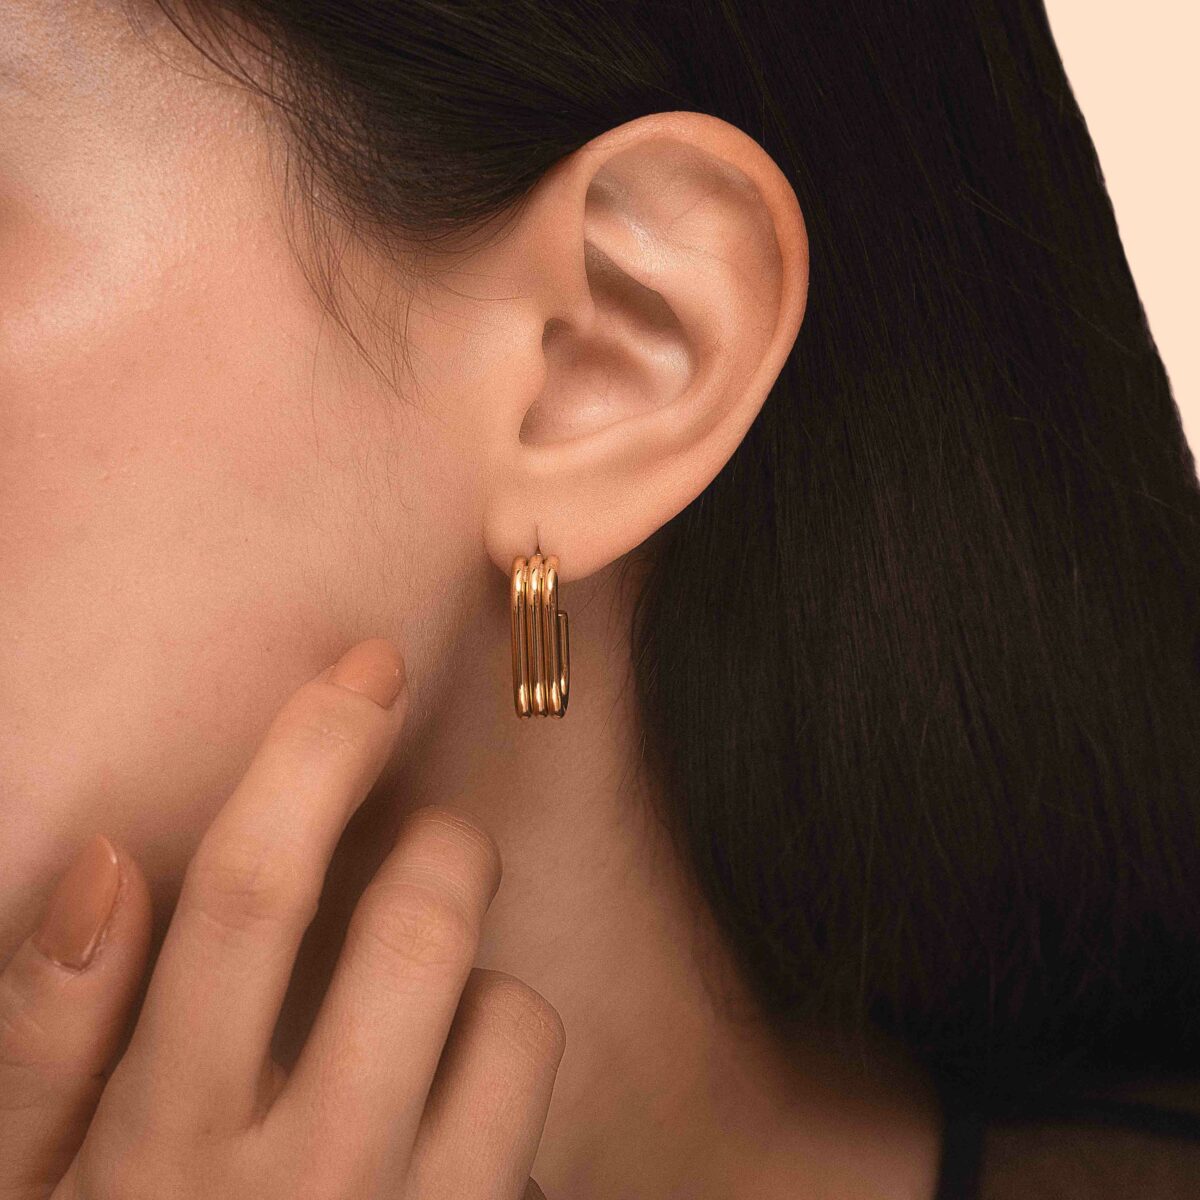 https://m.clubbella.co/product/new-york-essential-earrings/ sszz-6